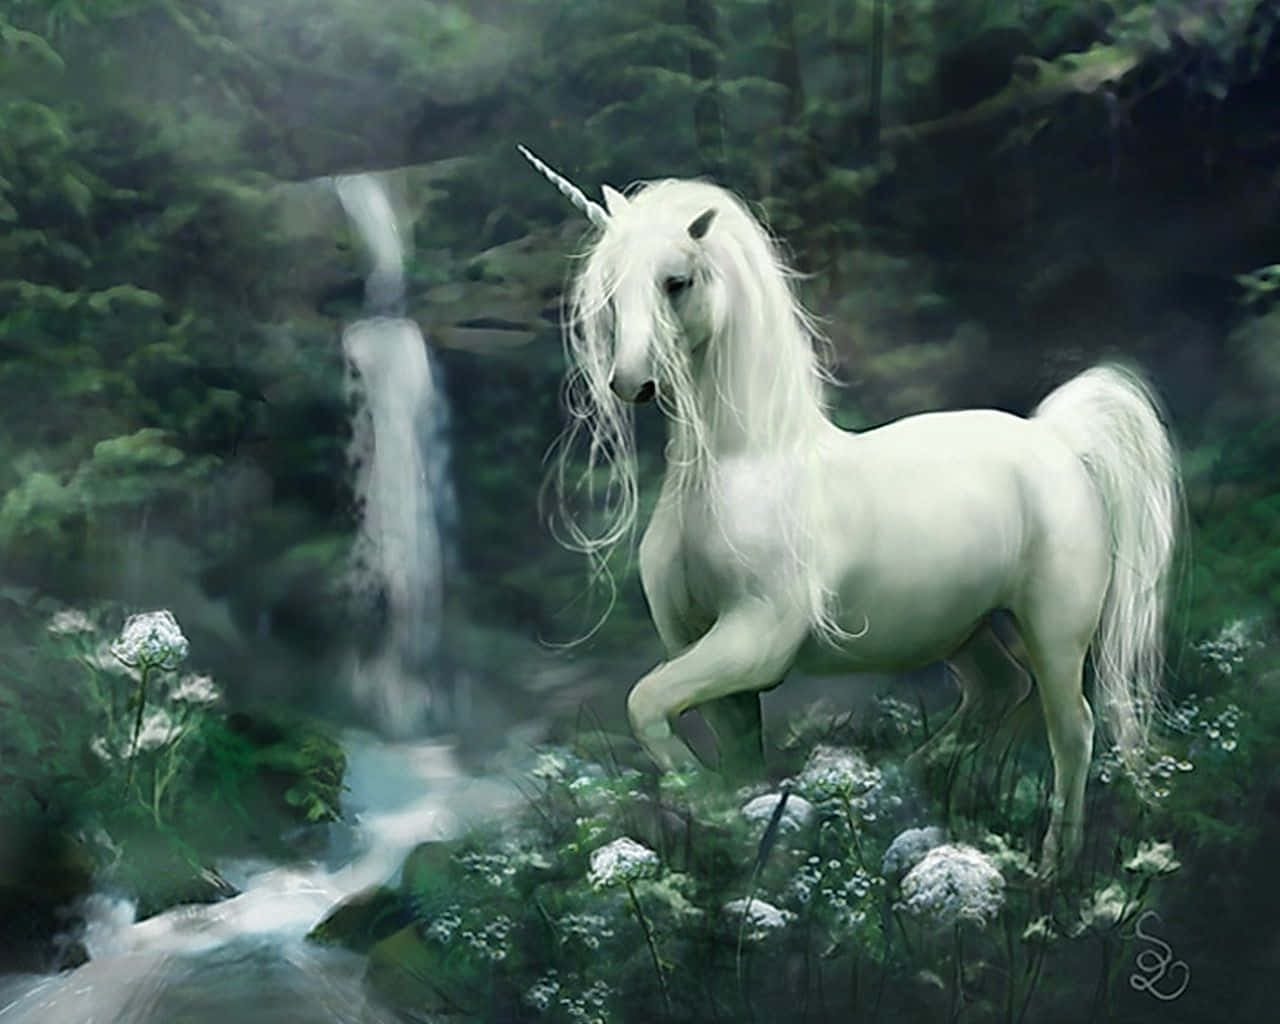 Magical Real Unicorn Glimpsed In A Fantasy World Background